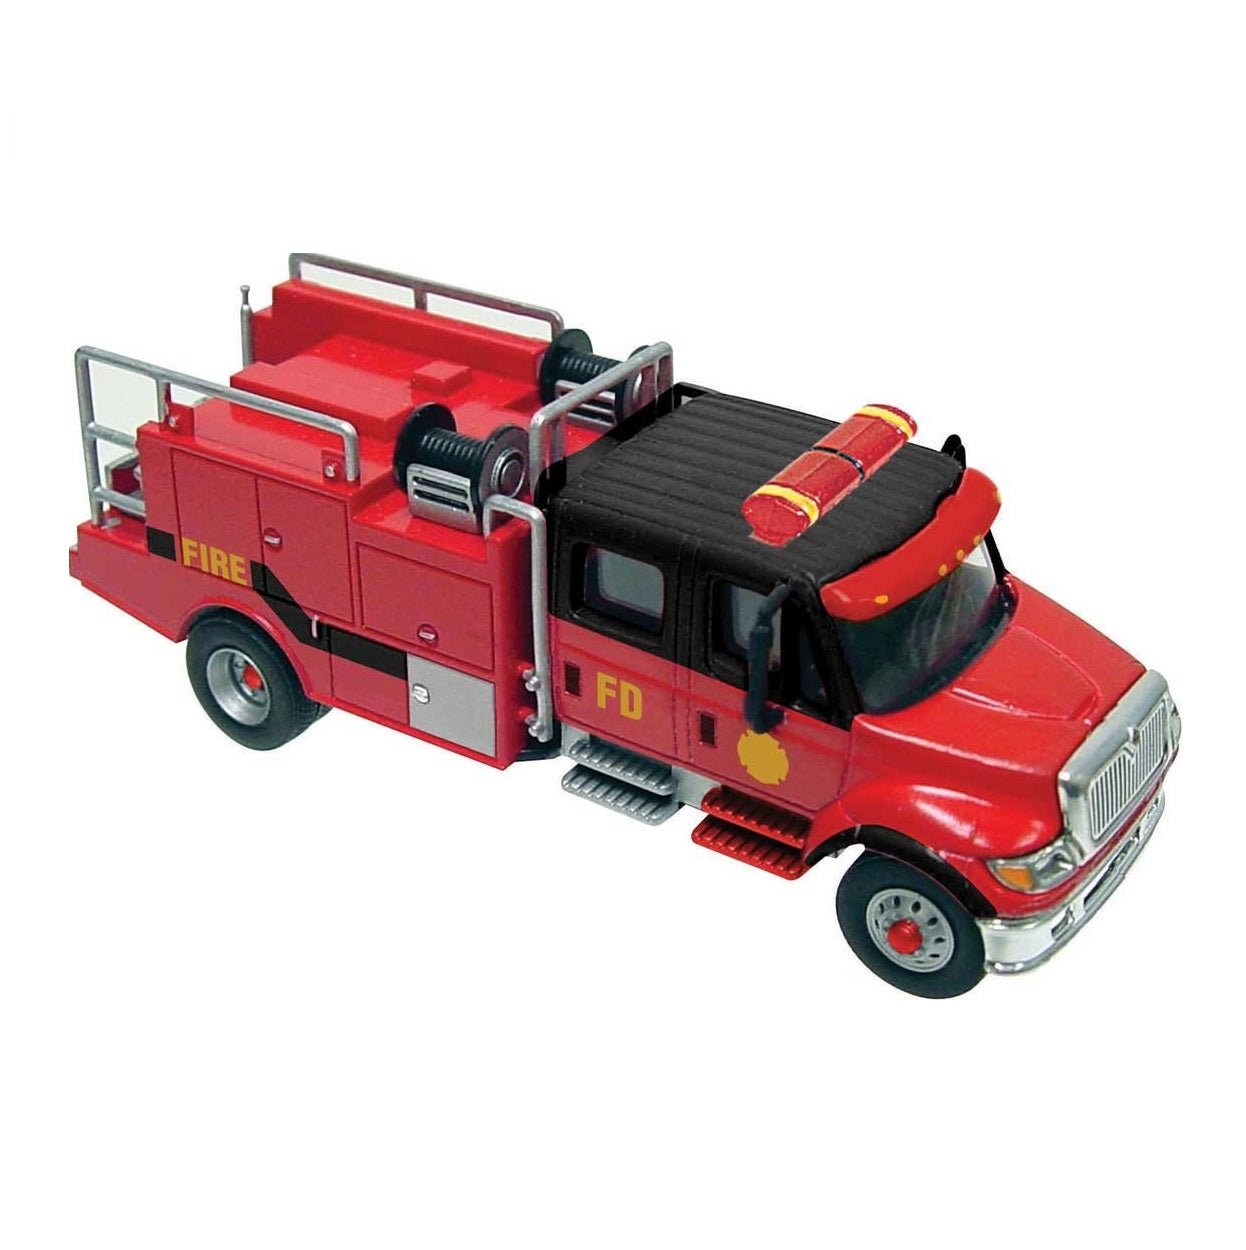 Walthers SceneMaster International 7600 2-Axle Crew-Cab Fire Truck, HO Scale